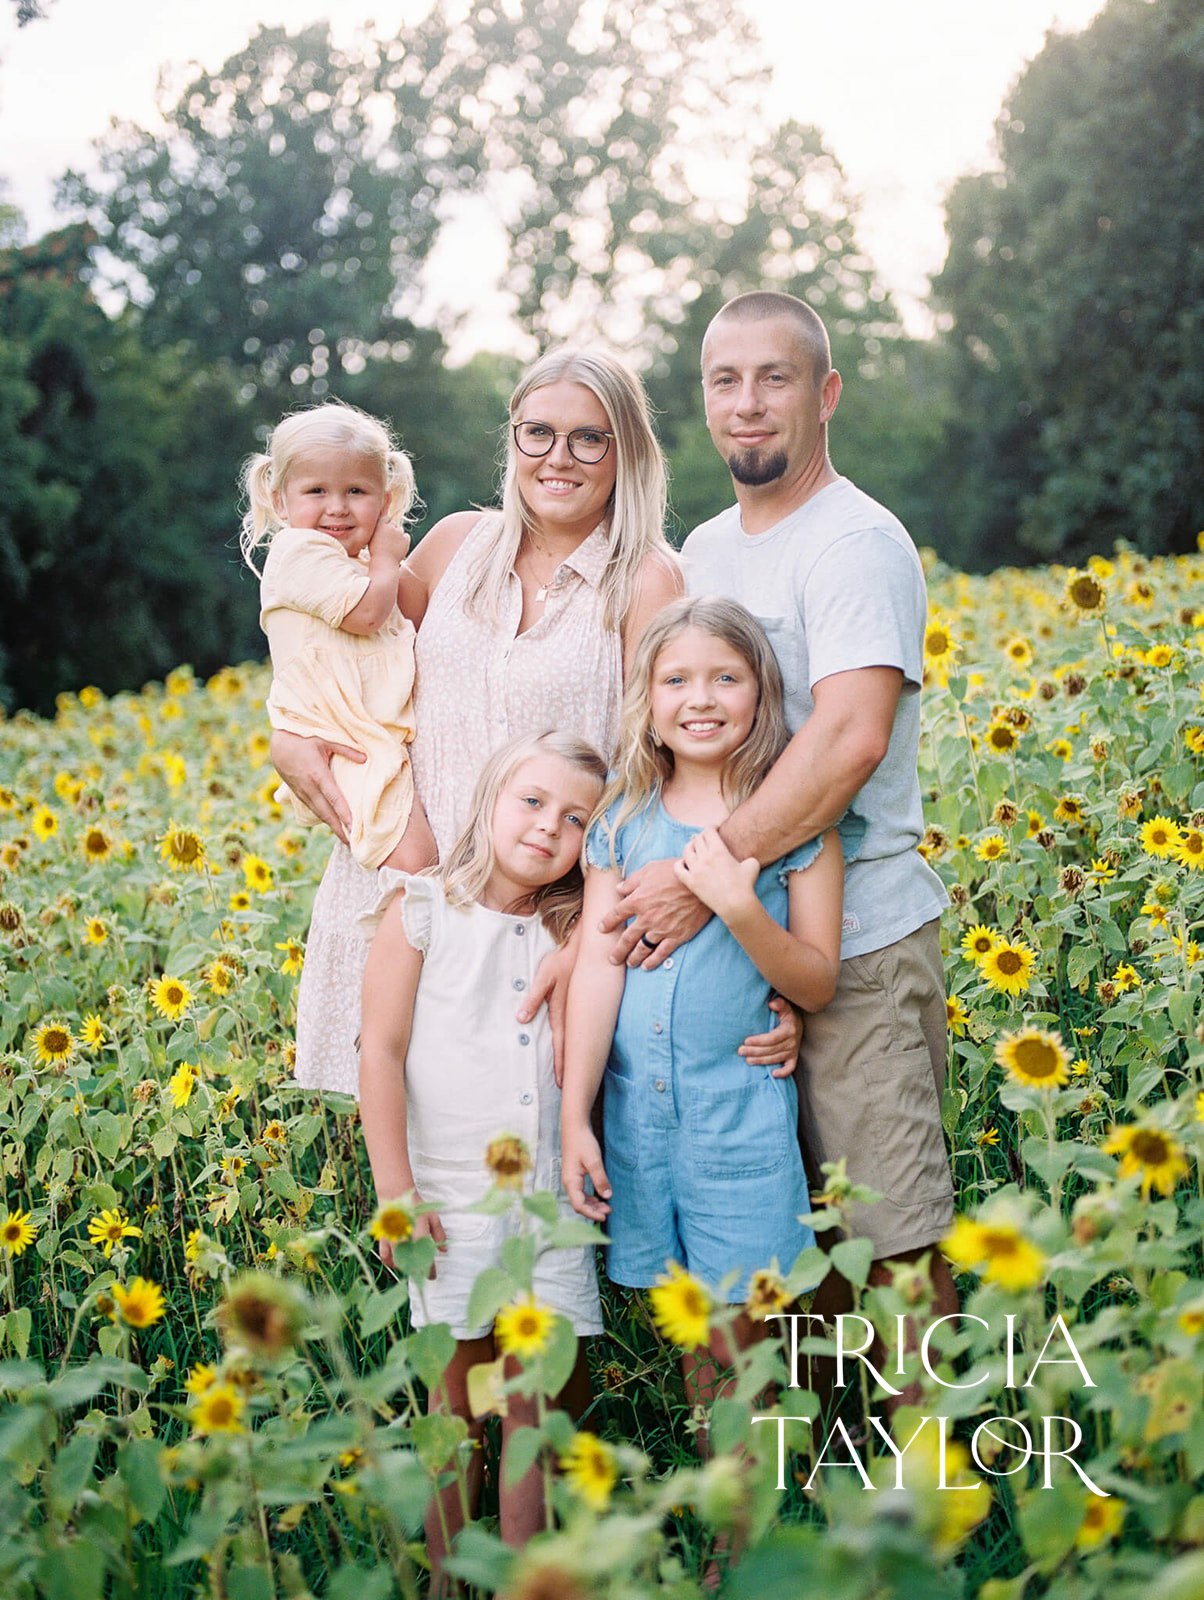 A family of five stands together in a field of sunflowers